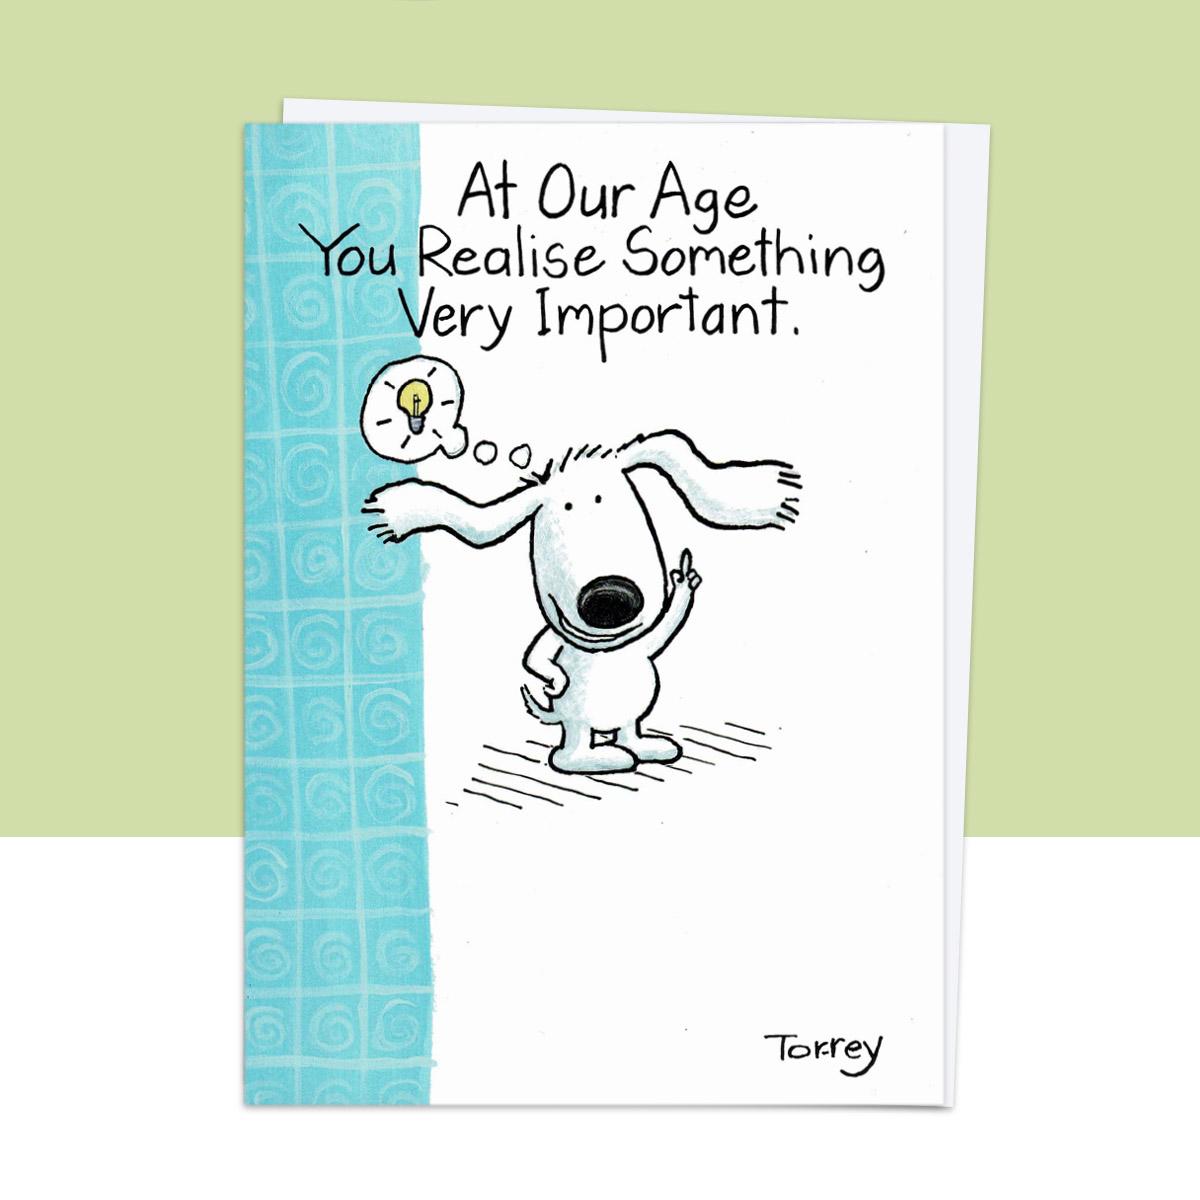 At Our Age You Realise Something Very Important' Funny Card Front Image